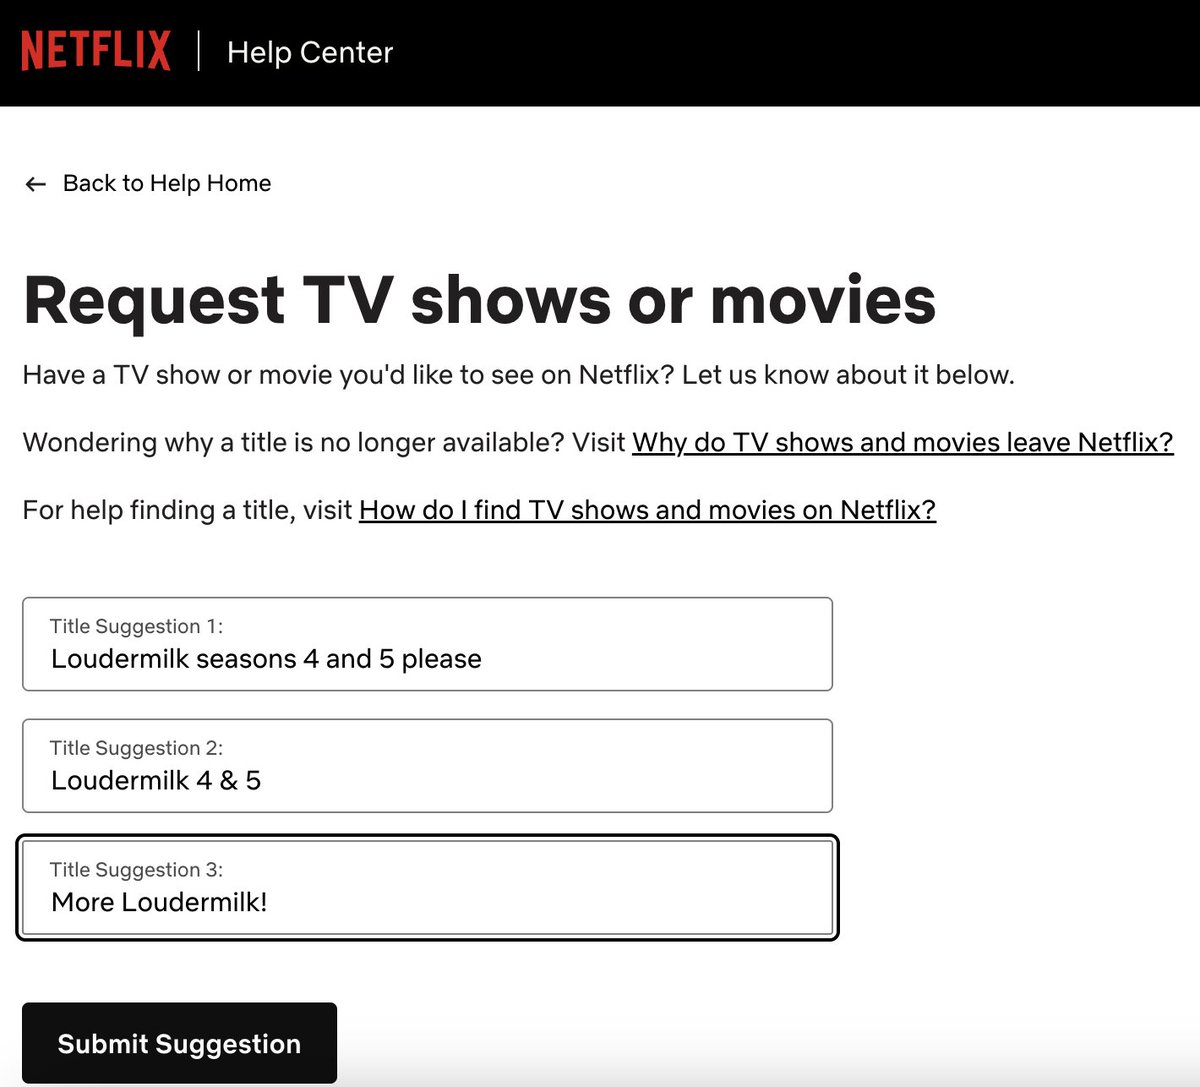 IF you liked Loudermilk and IF you wanna see more, you can express that to Netflix directly! I've heard it can influence their decisions, not that I've had anything to do with it you understand... help.netflix.com/en/titlerequest